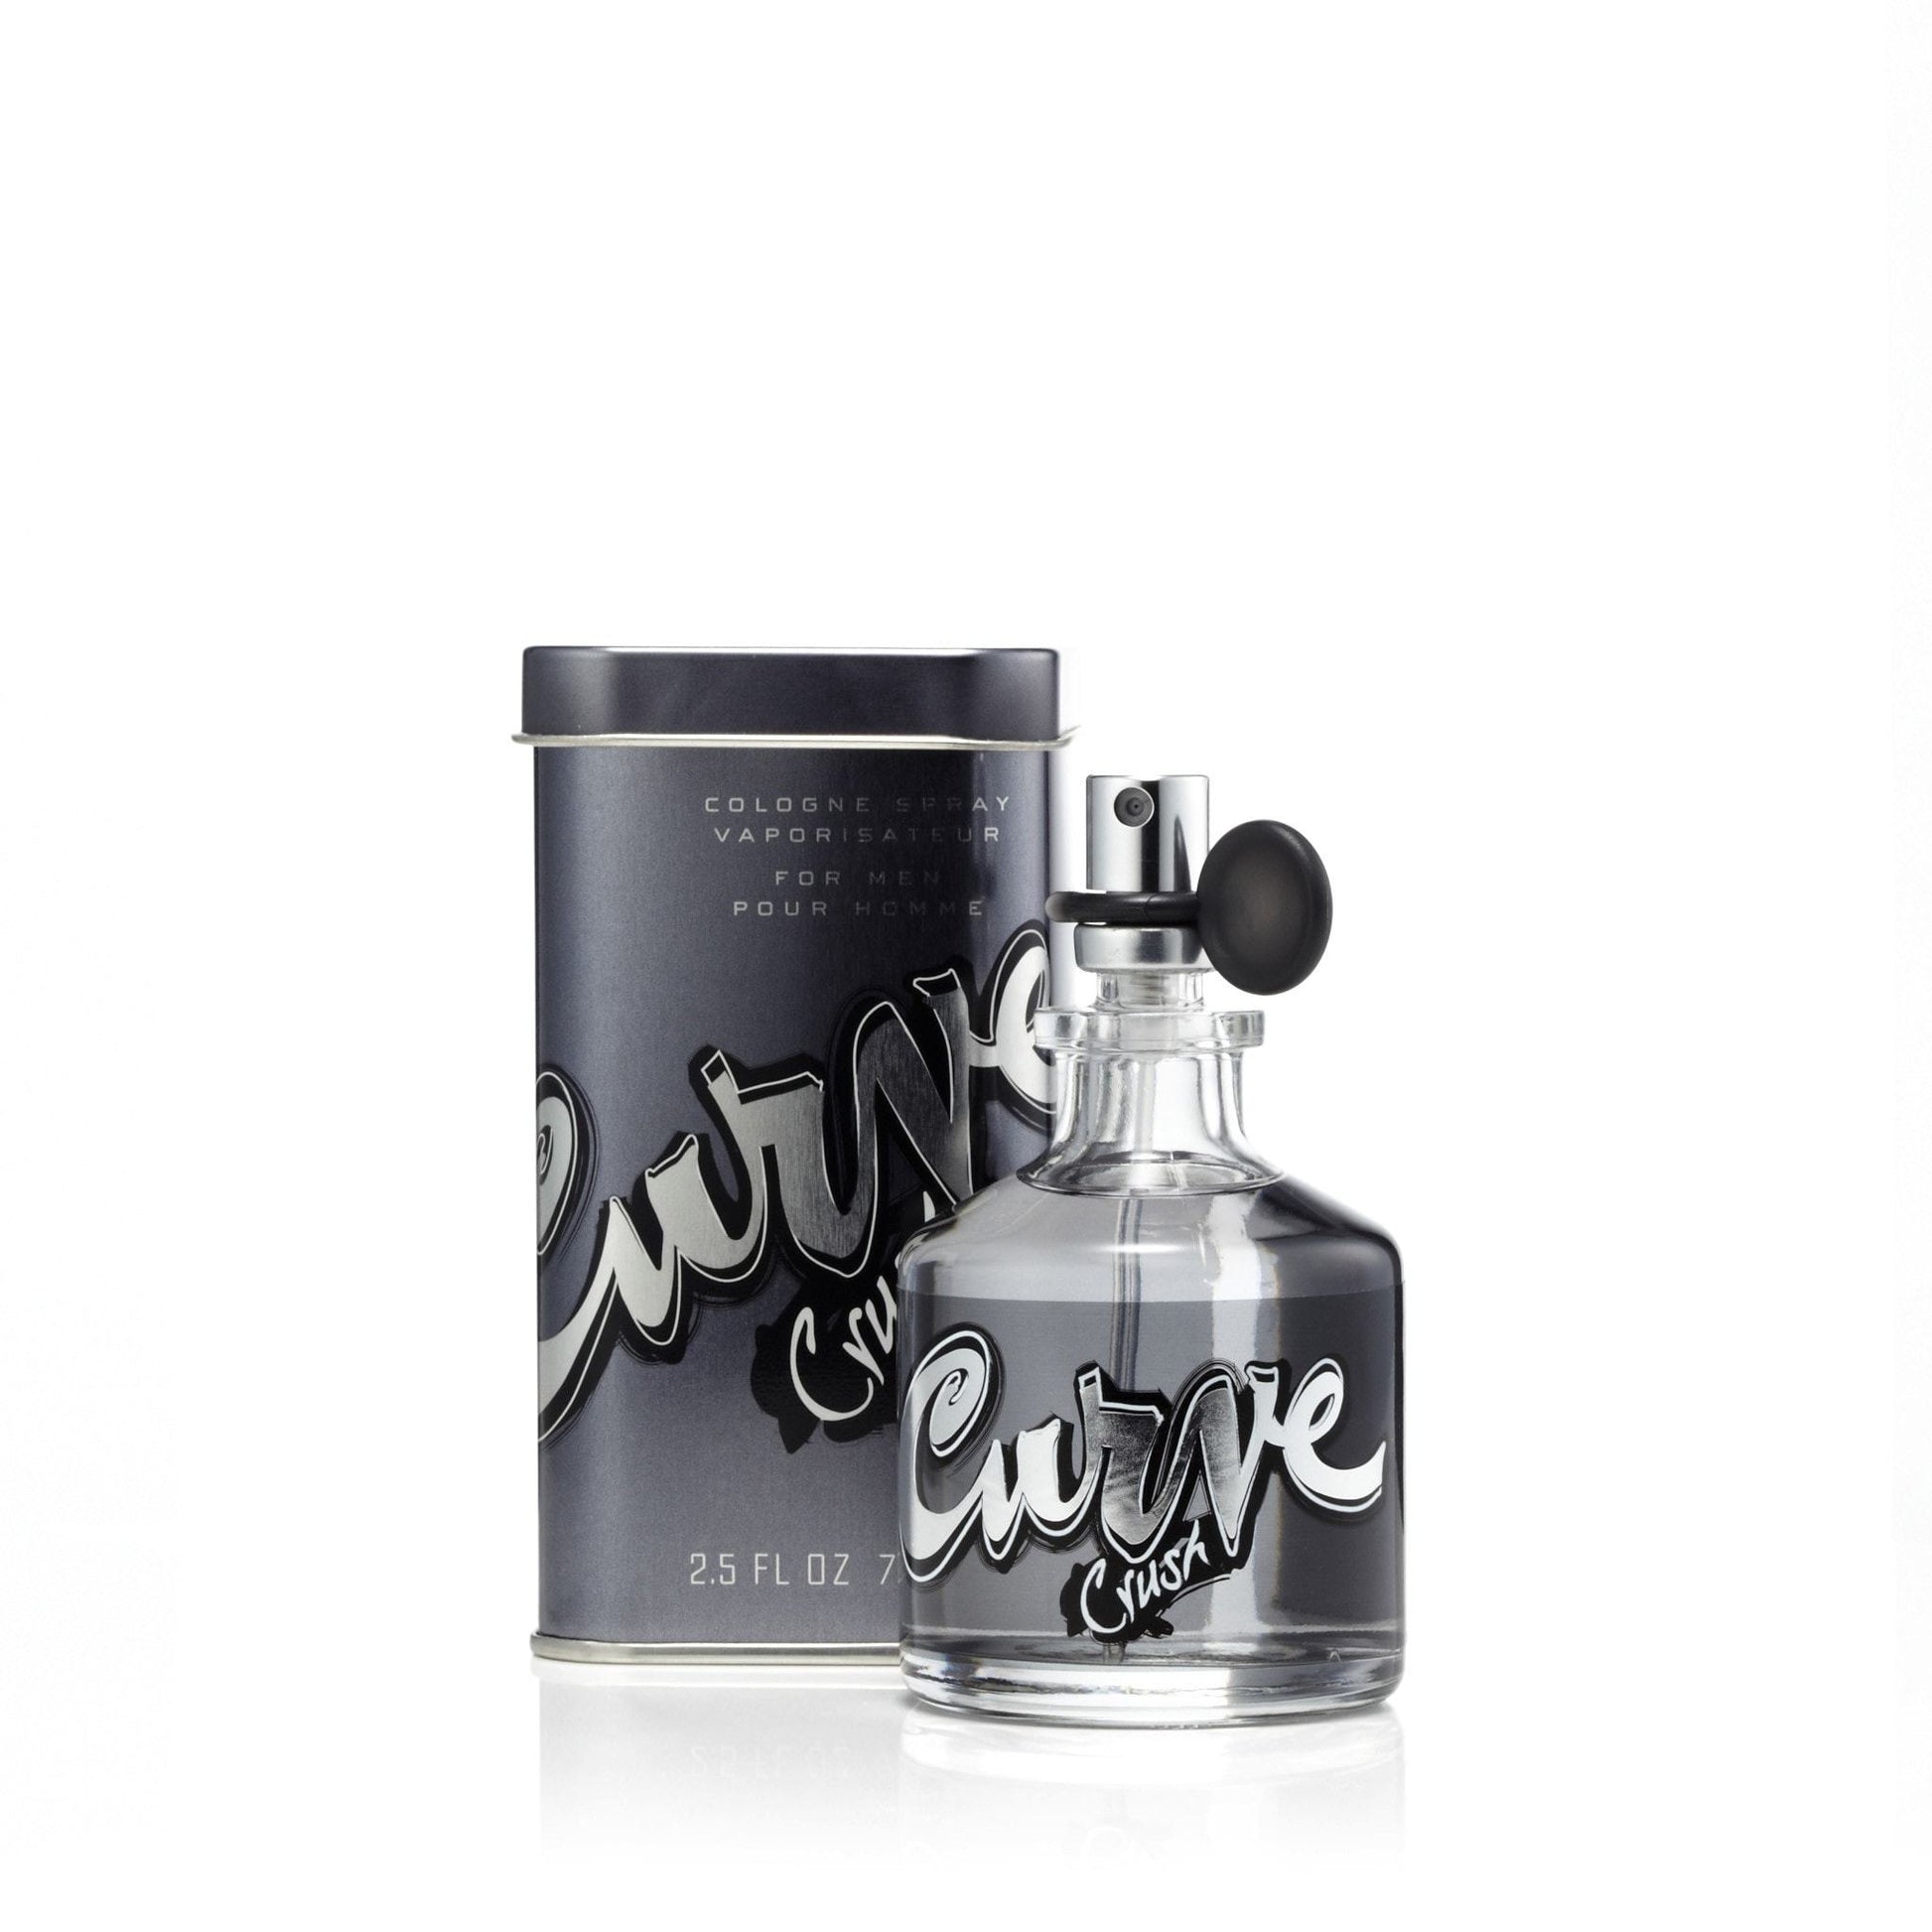 Curve Crush Cologne Spray for Men by Claiborne, Product image 3